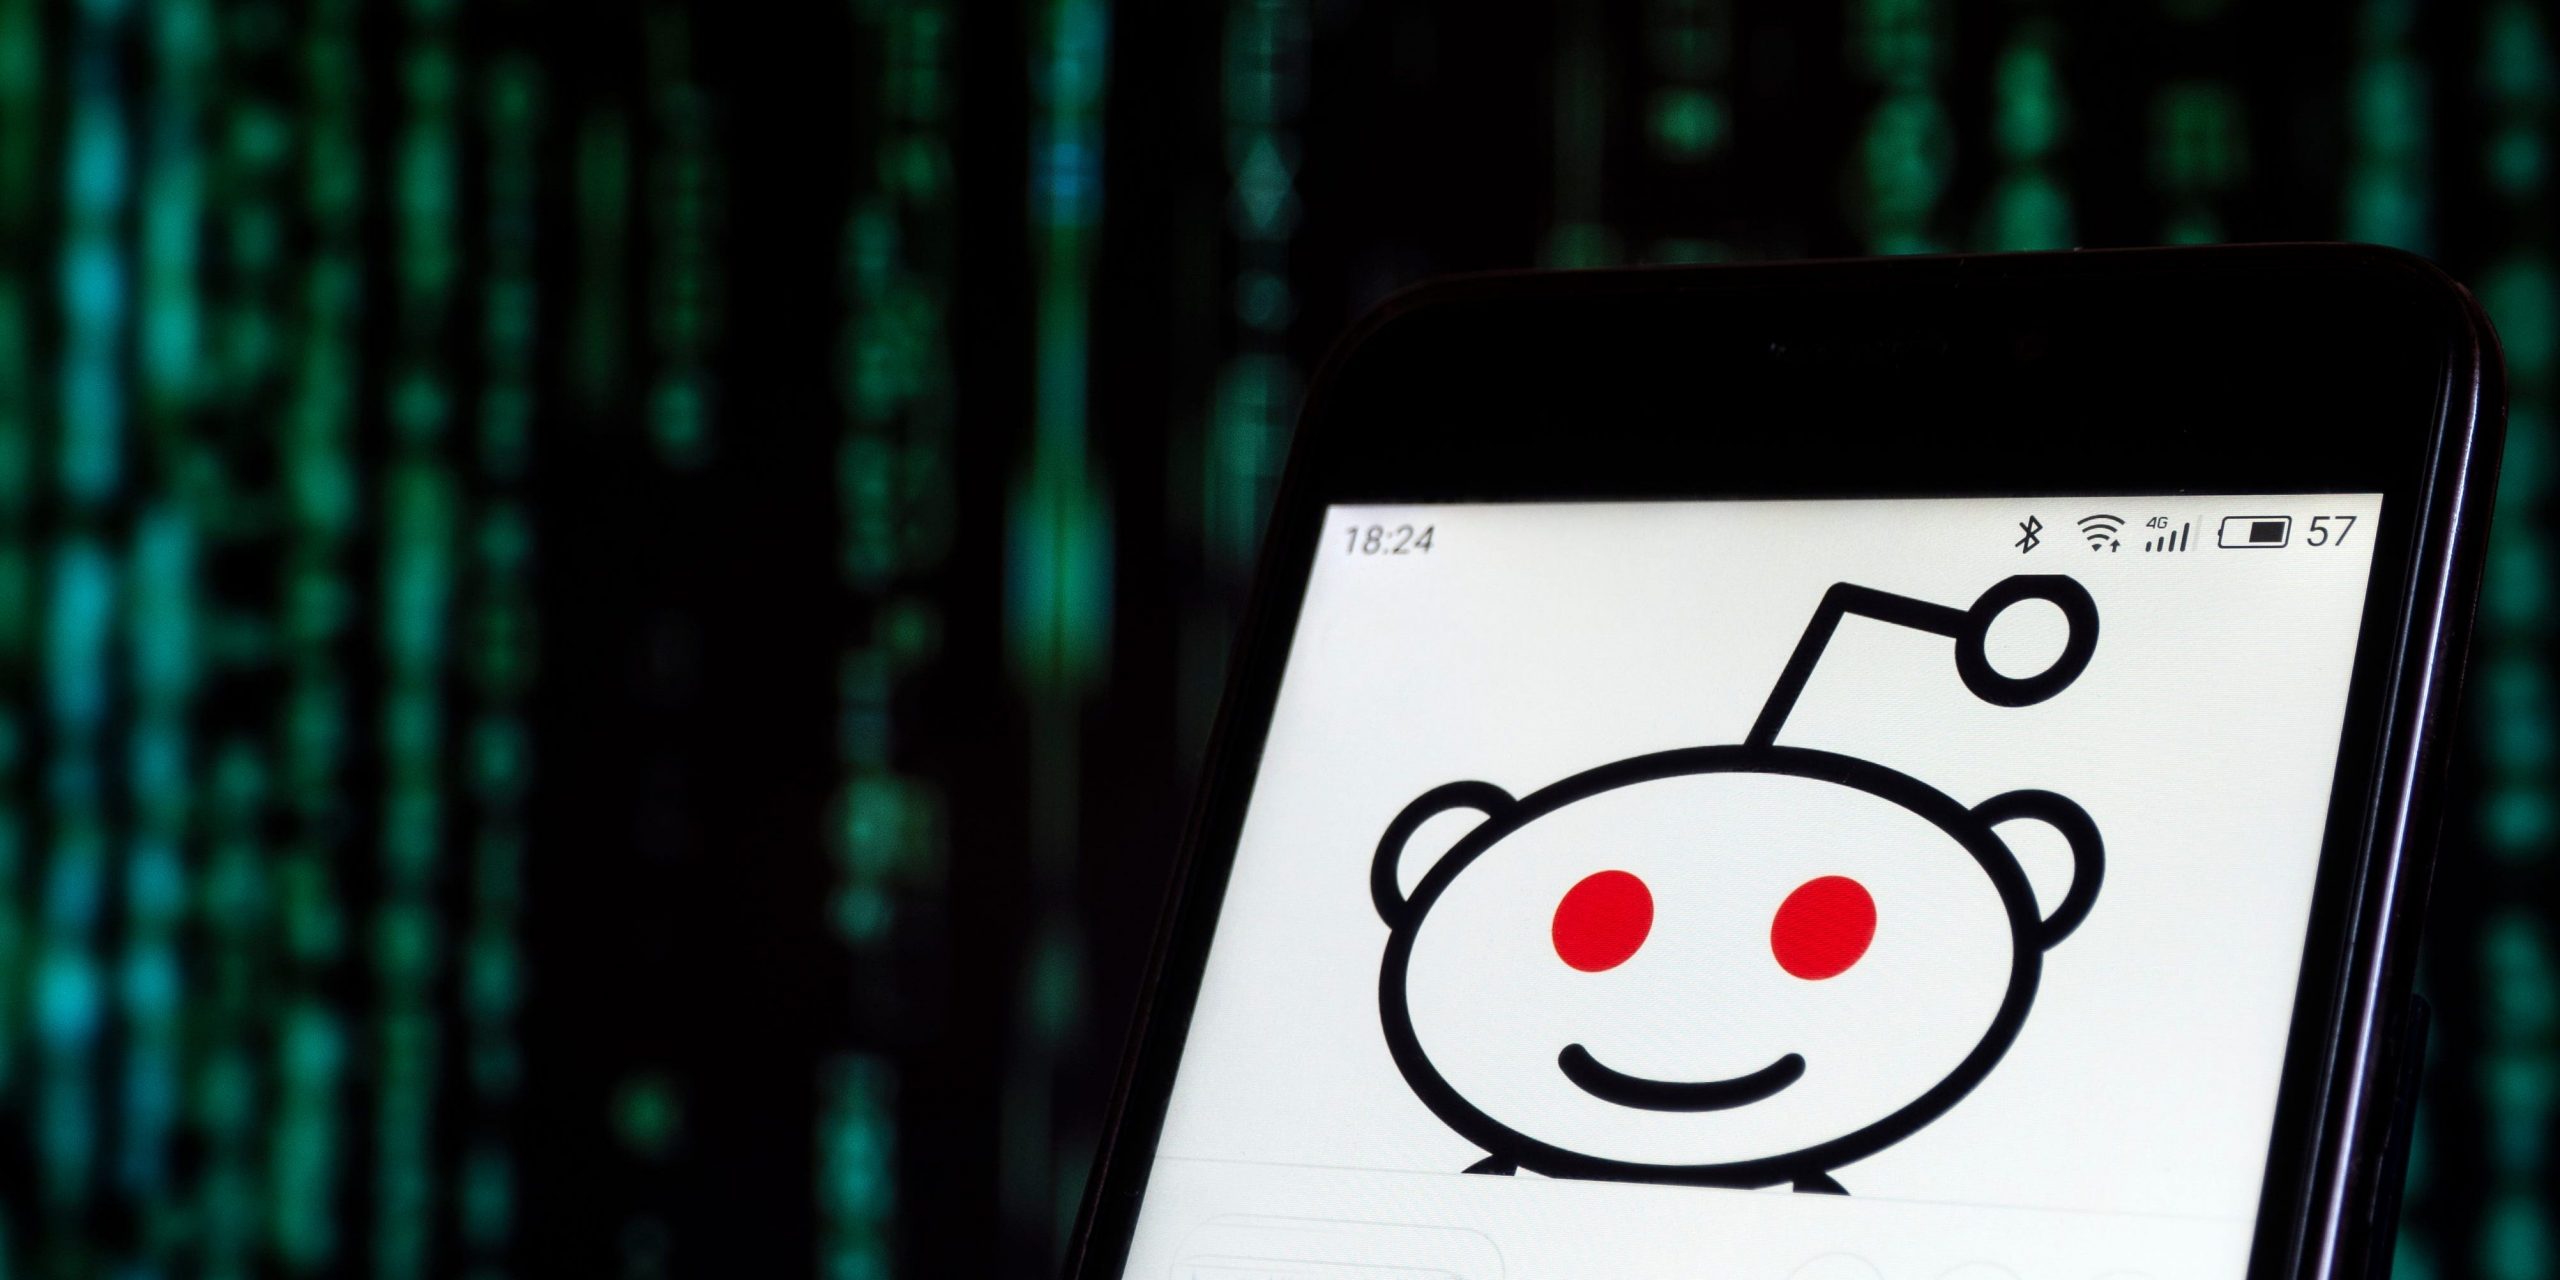 KIEV, UKRAINE - 2018/08/14: In this photo illustration, the Reddit social networking website seen displayed on a smartphone.